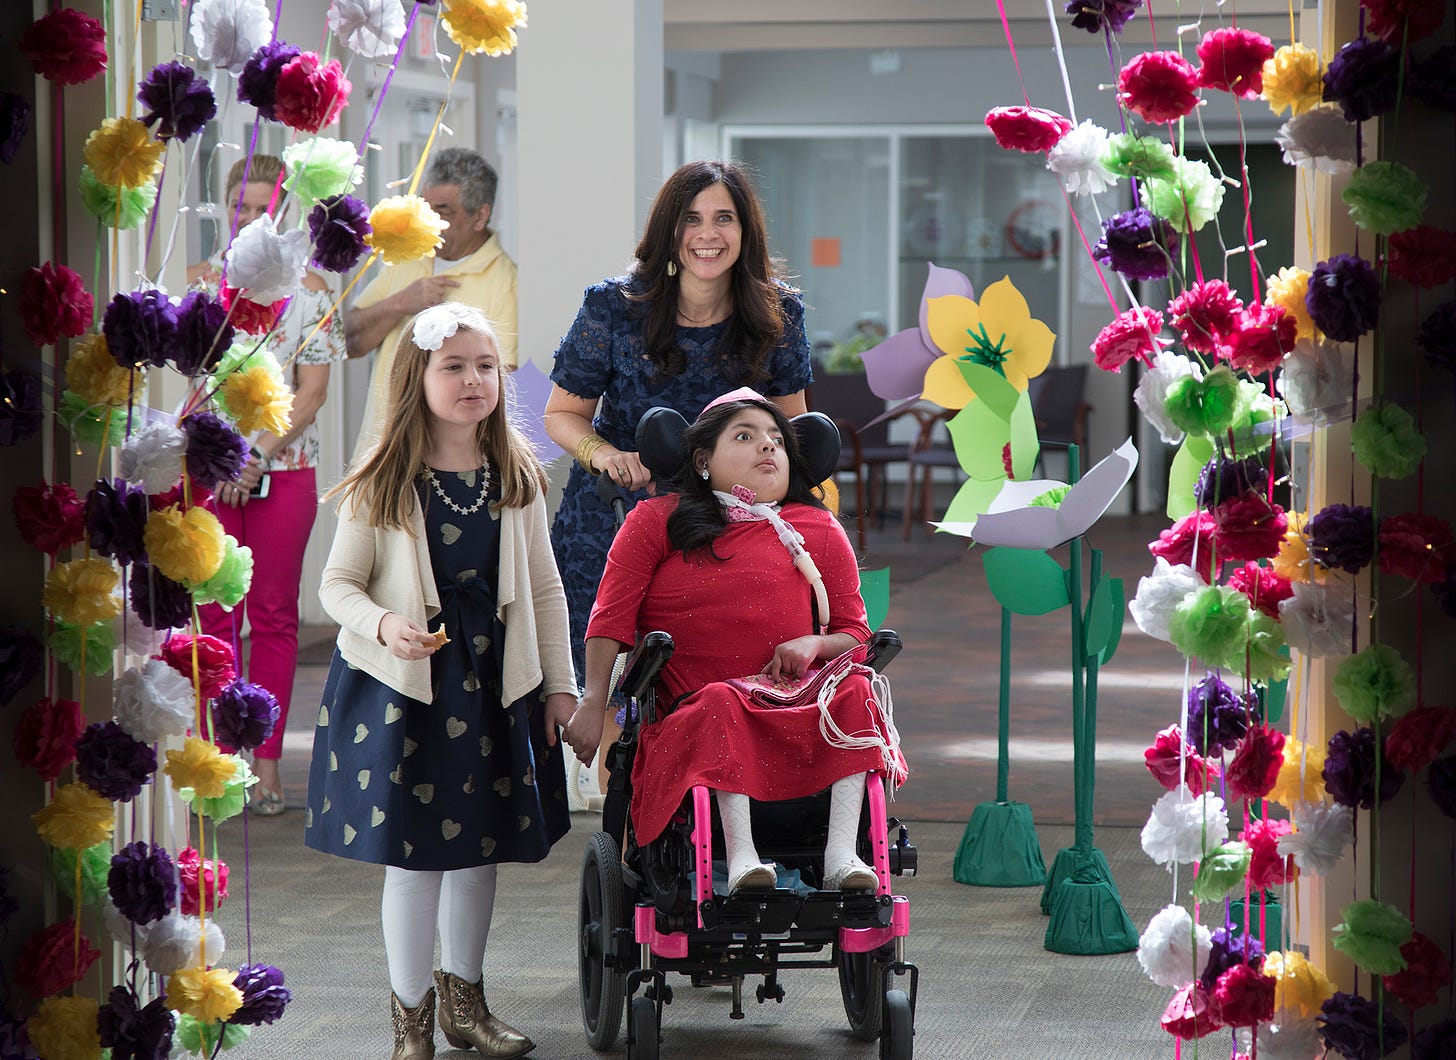 Dalia enters the party surrounded by a floral arch. She holds the hand of a friend. her mother stands behind, pushing her wheelchair and smiles at the camera